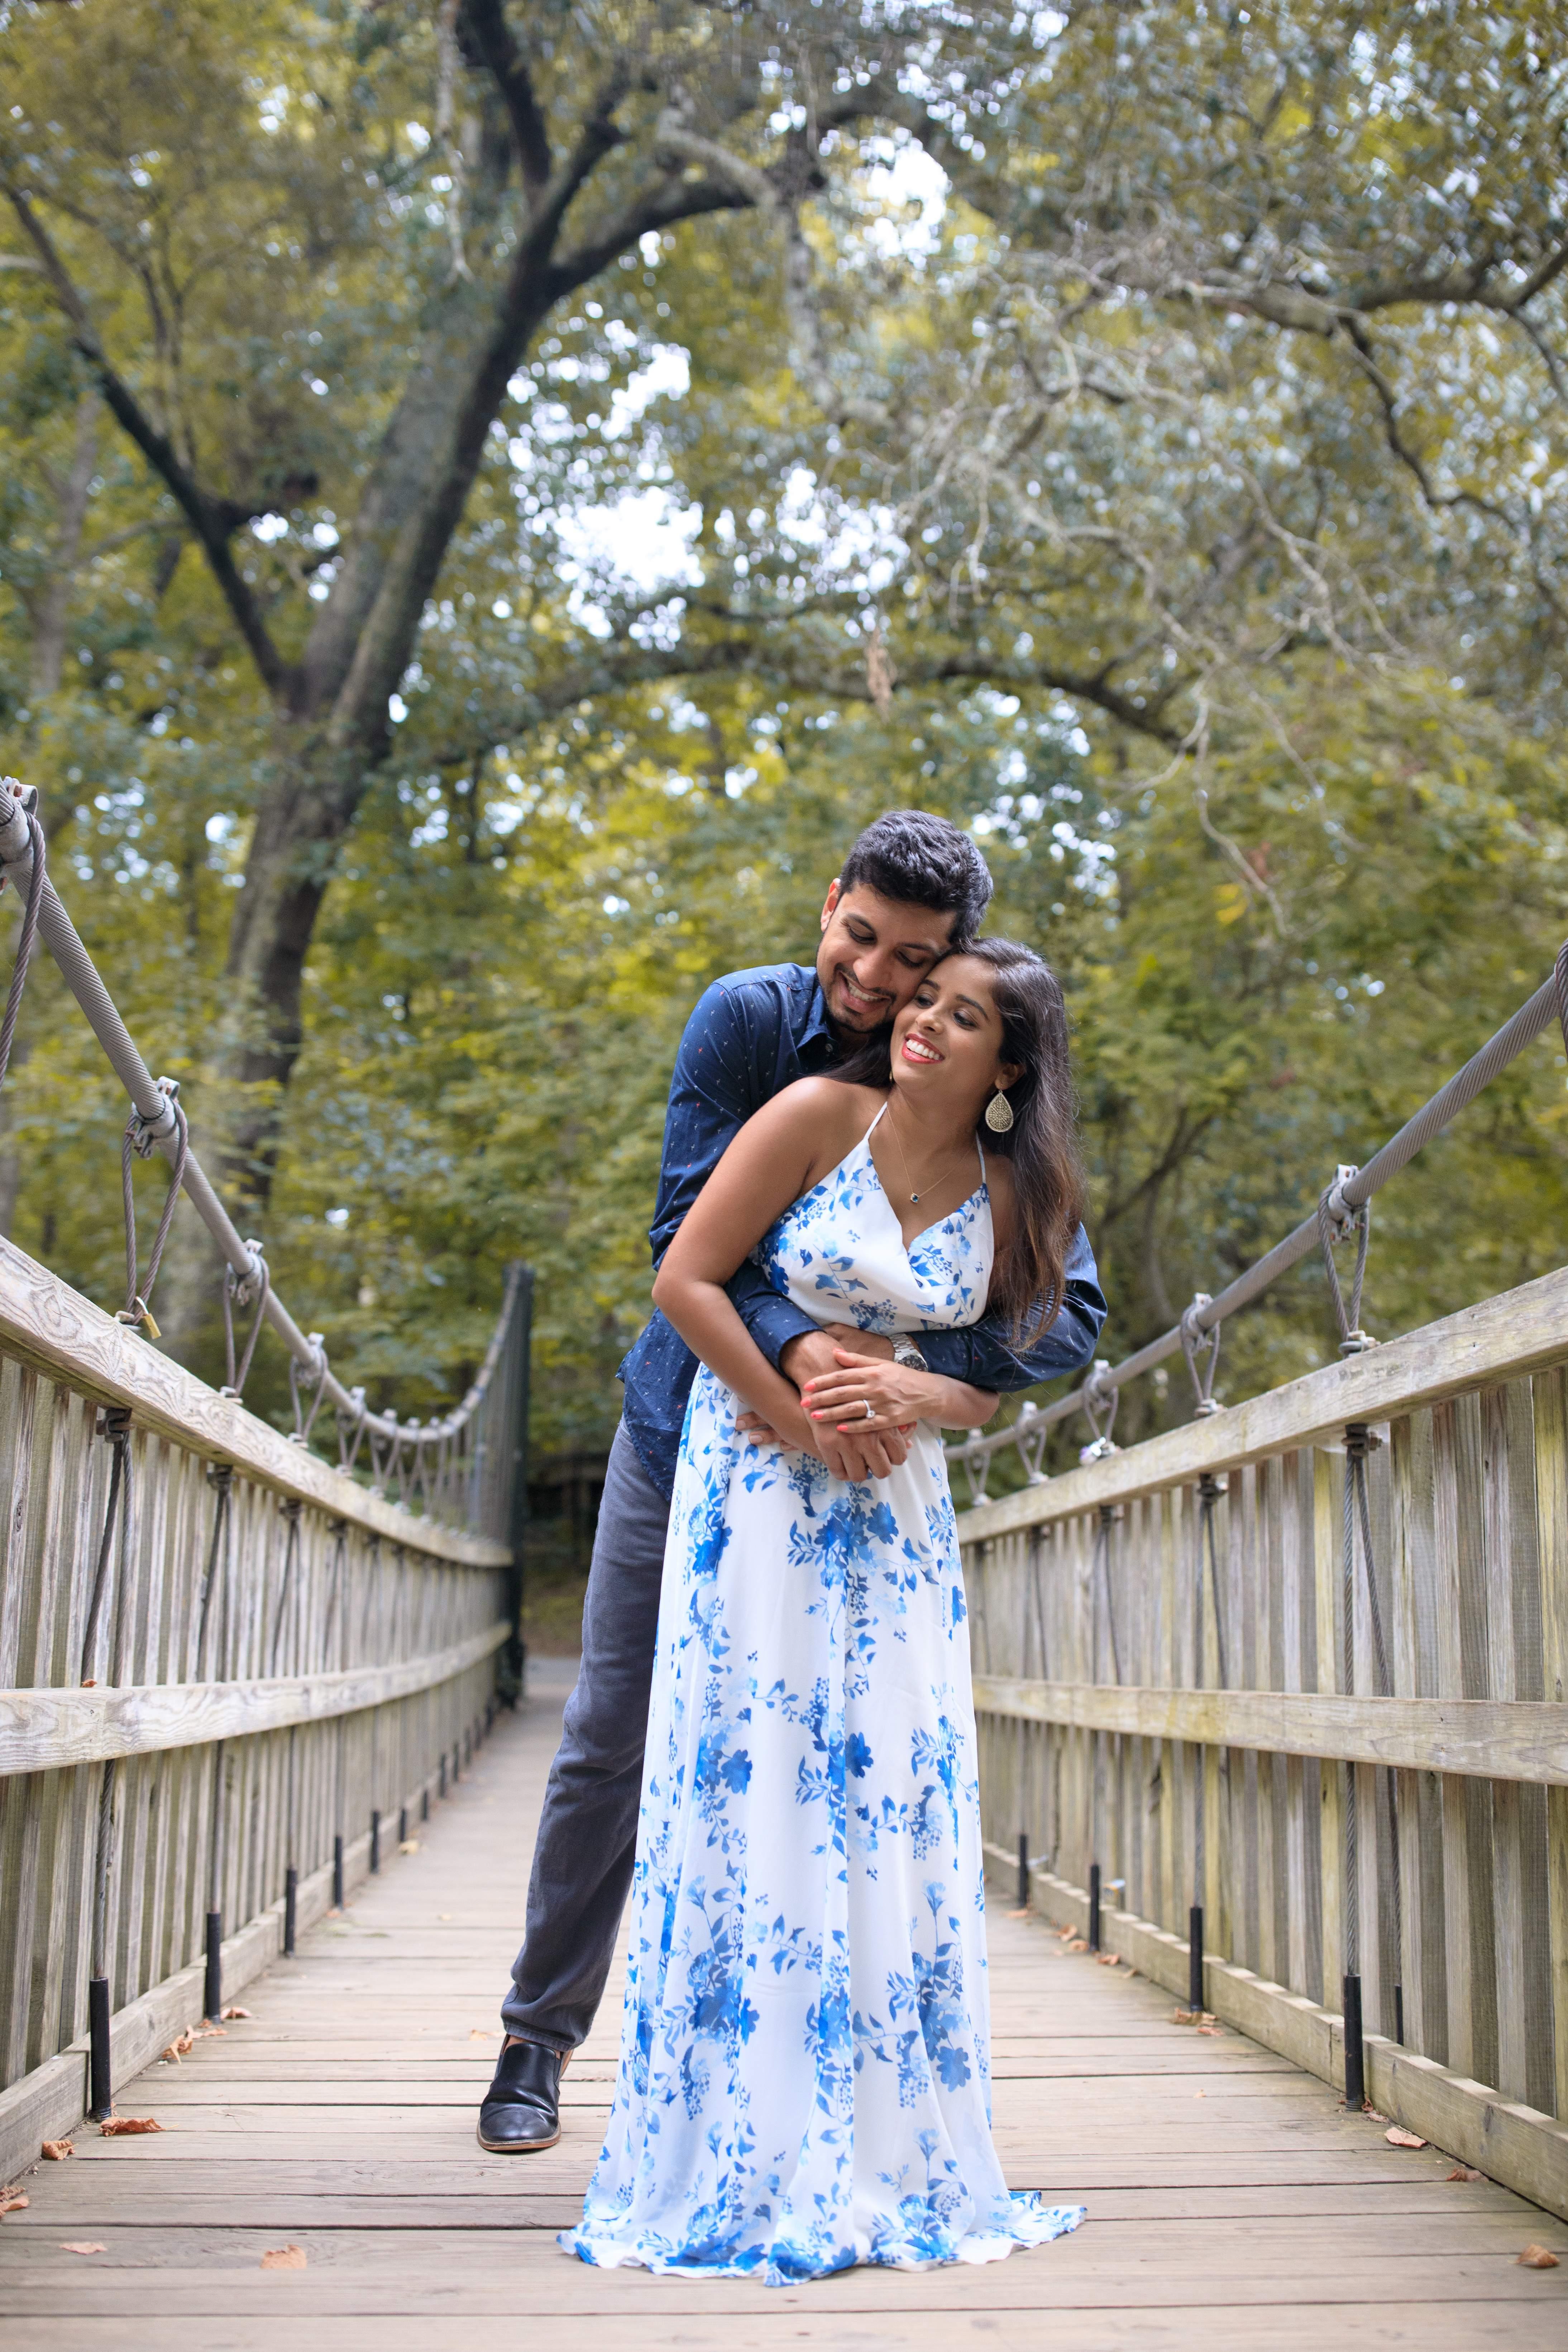 The Wedding Website of Neelam Patel and Keval Amin